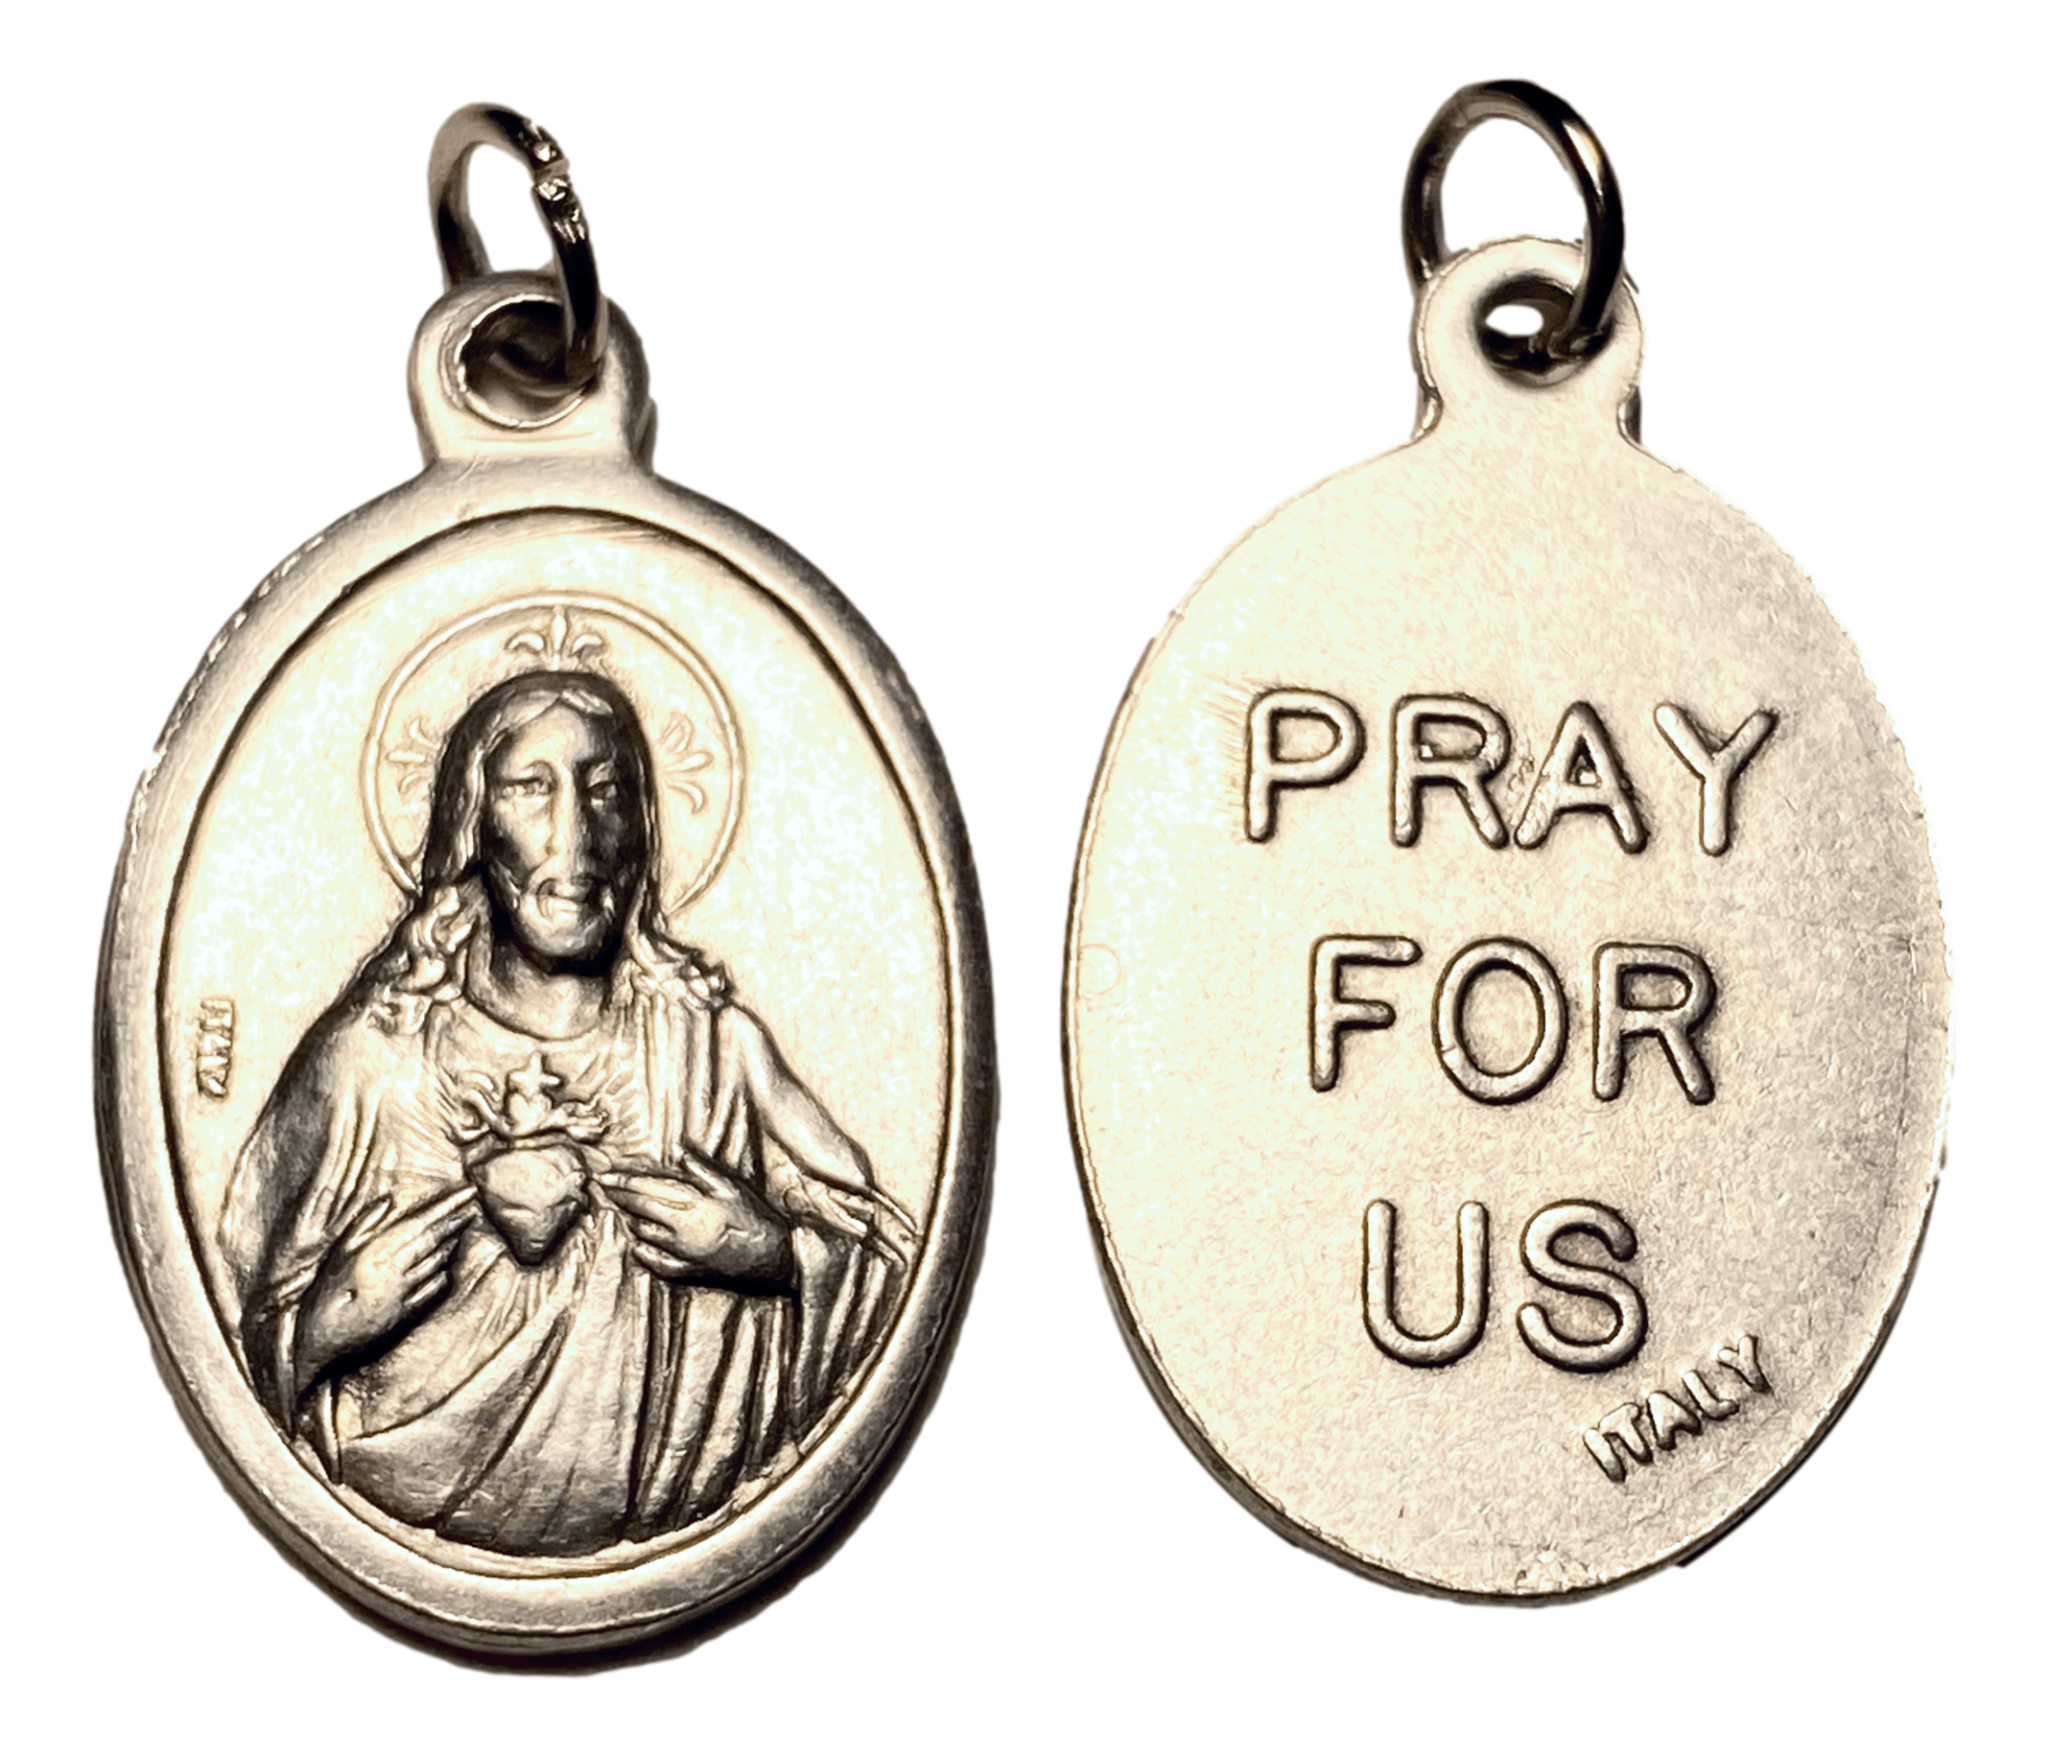 Medal Sacred Heart Pray For Us Italian Double-Sided Silver Oxidized Metal Alloy 1 L x 1/2 W Inches - Ysleta Mission Gift Shop- VOTED El Paso's Best Gift Shop